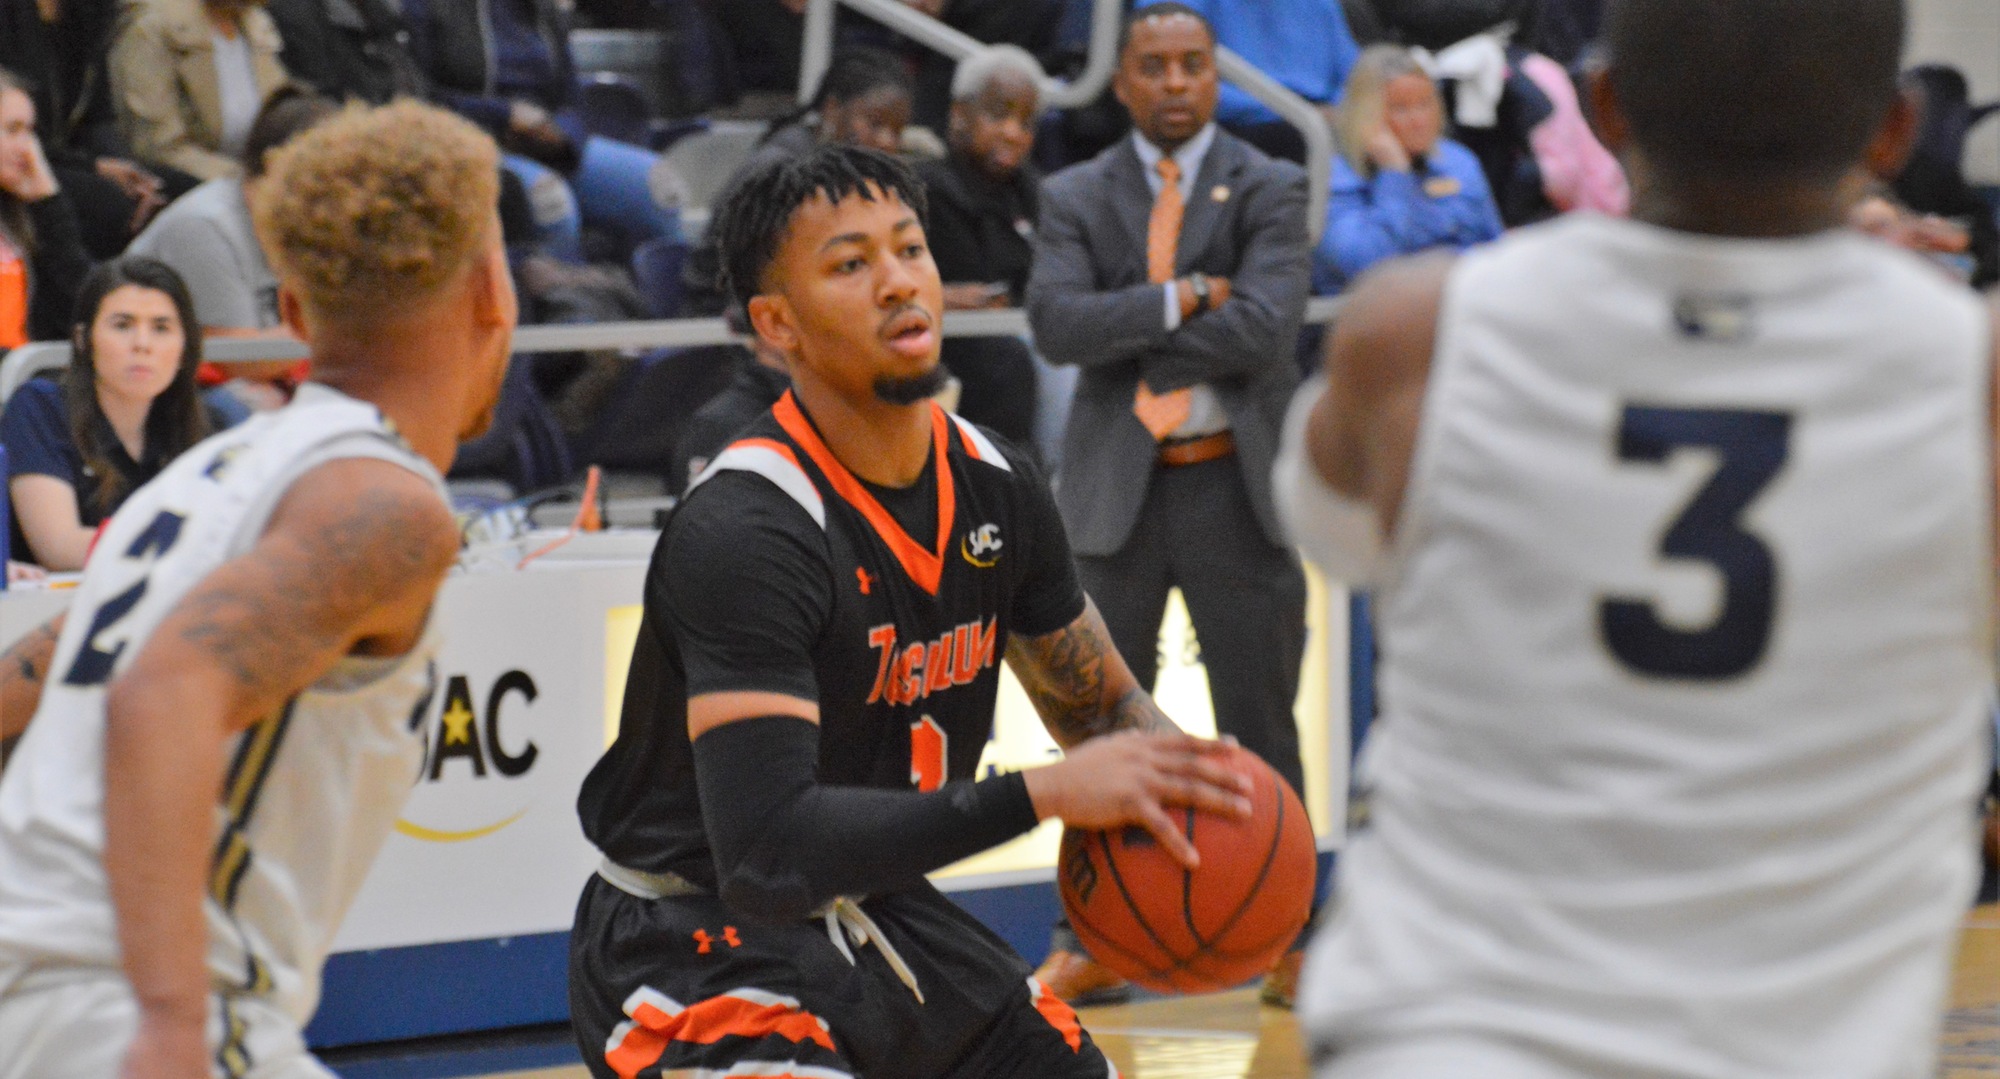 Donovan Donaldson scored a career-high 32 points in Tusculum's 80-77 overtime win at Wingate